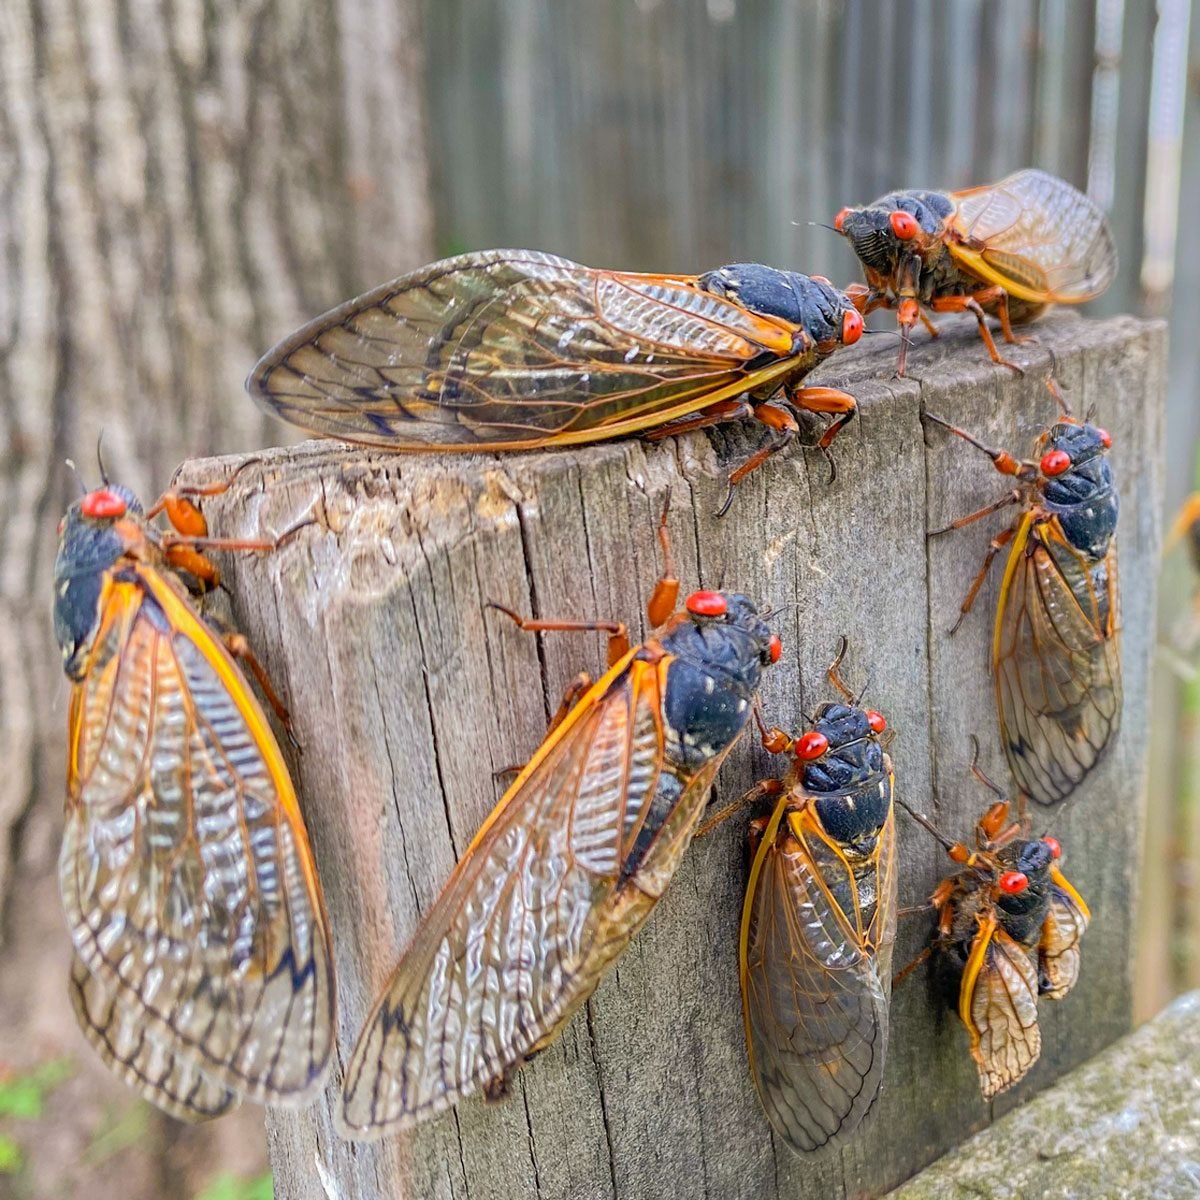 How To Keep Cicadas from Taking Over Your Home Without Using Pesticide